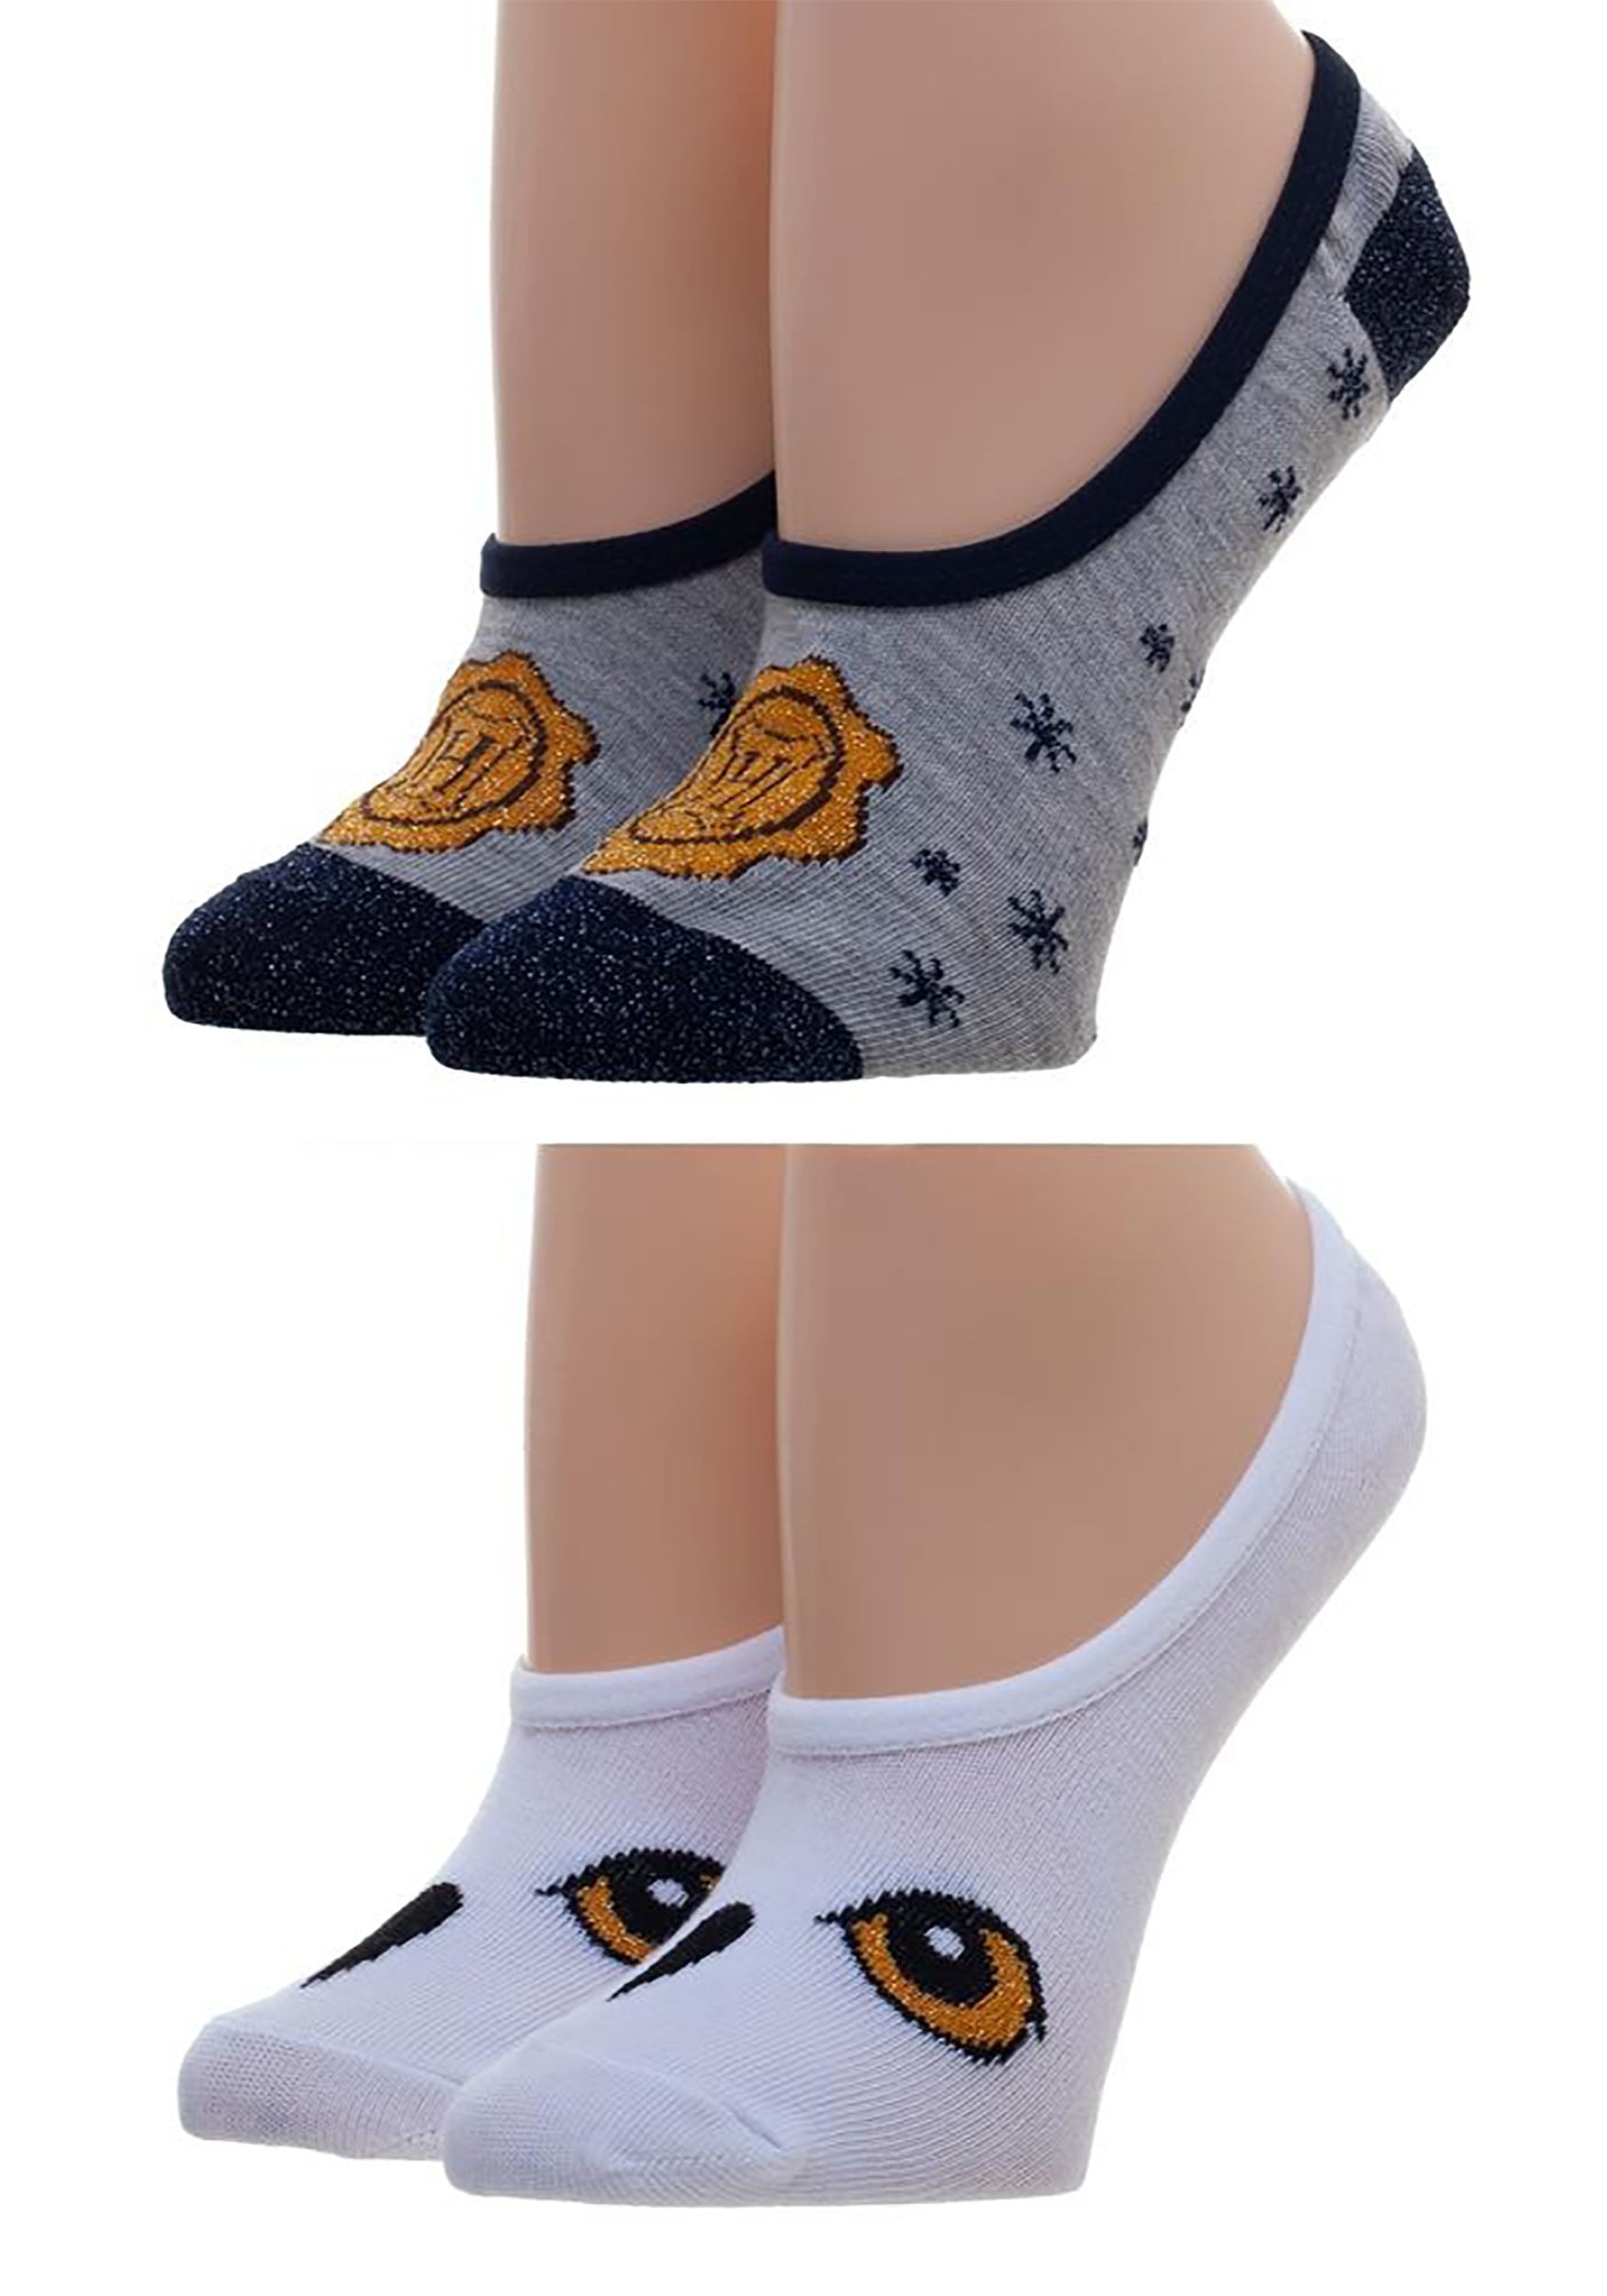 Details about   Harry Potter Ladies Socks Size UK 4-8 1 Pair New Gift Multicolour Wizard Snake